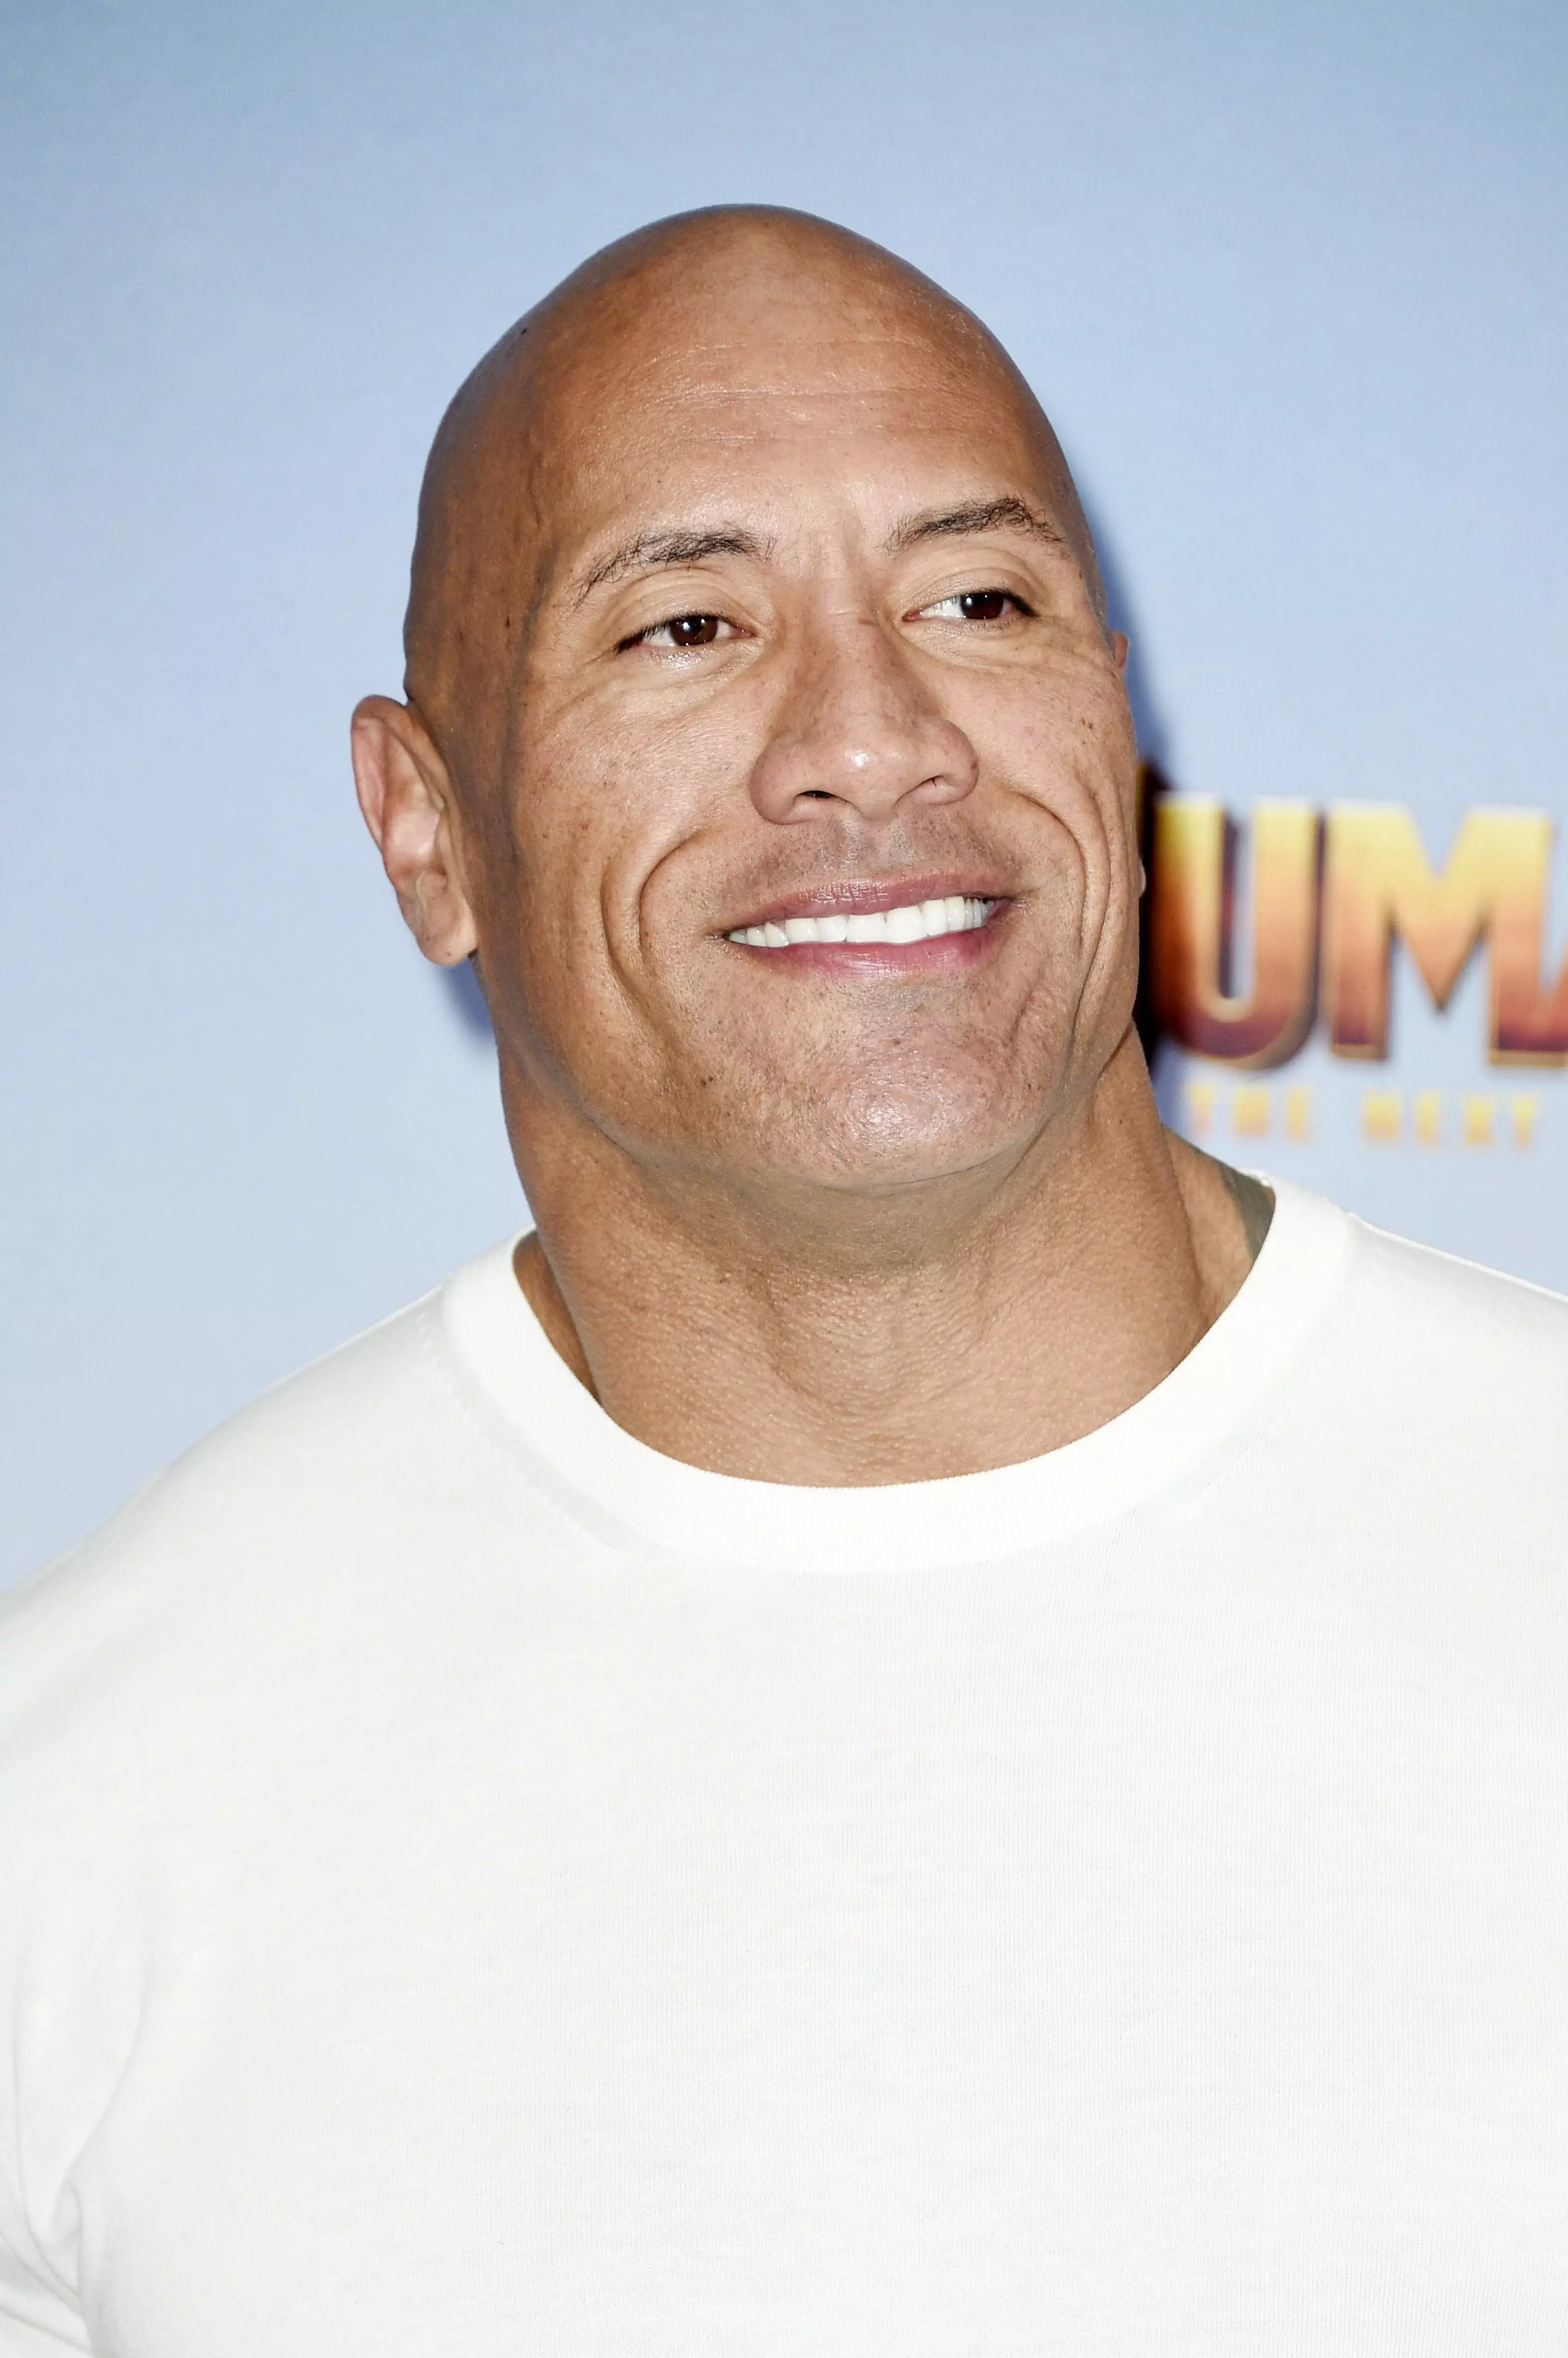 The Rock recently shared a snap of him getting the Covid vaccine.